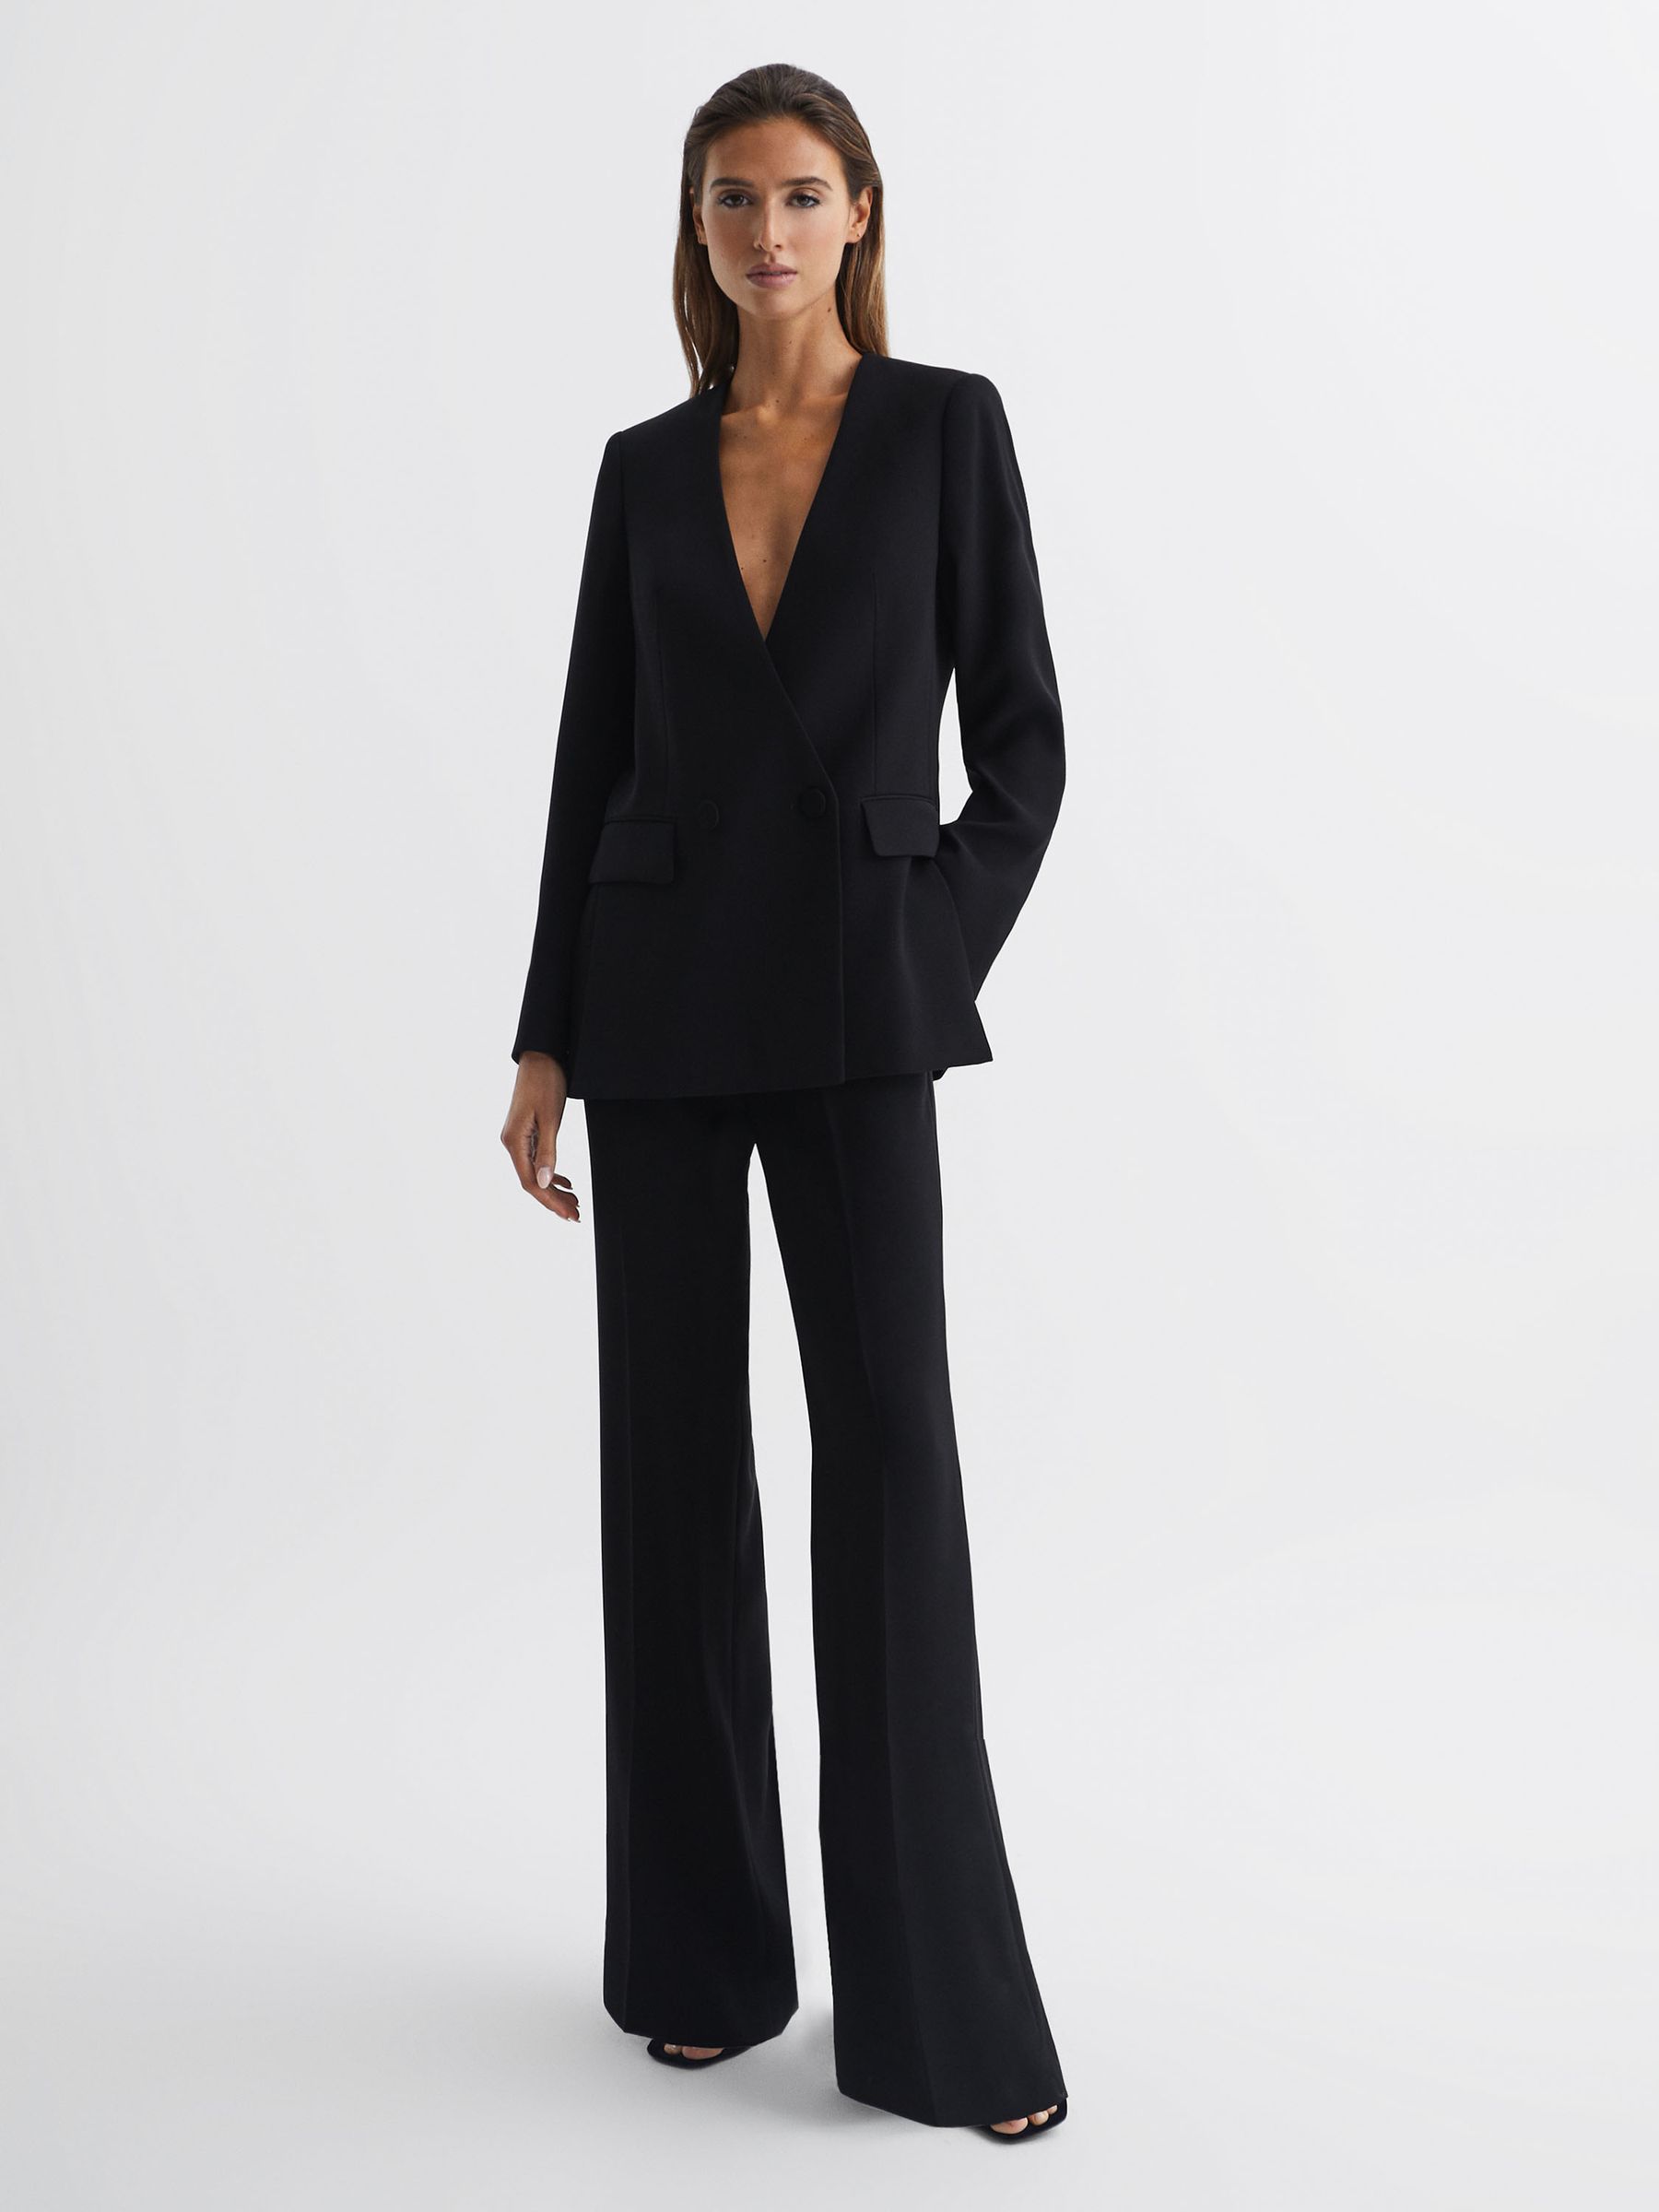 Reiss Margeaux Collarless Double Breasted Suit Blazer - REISS